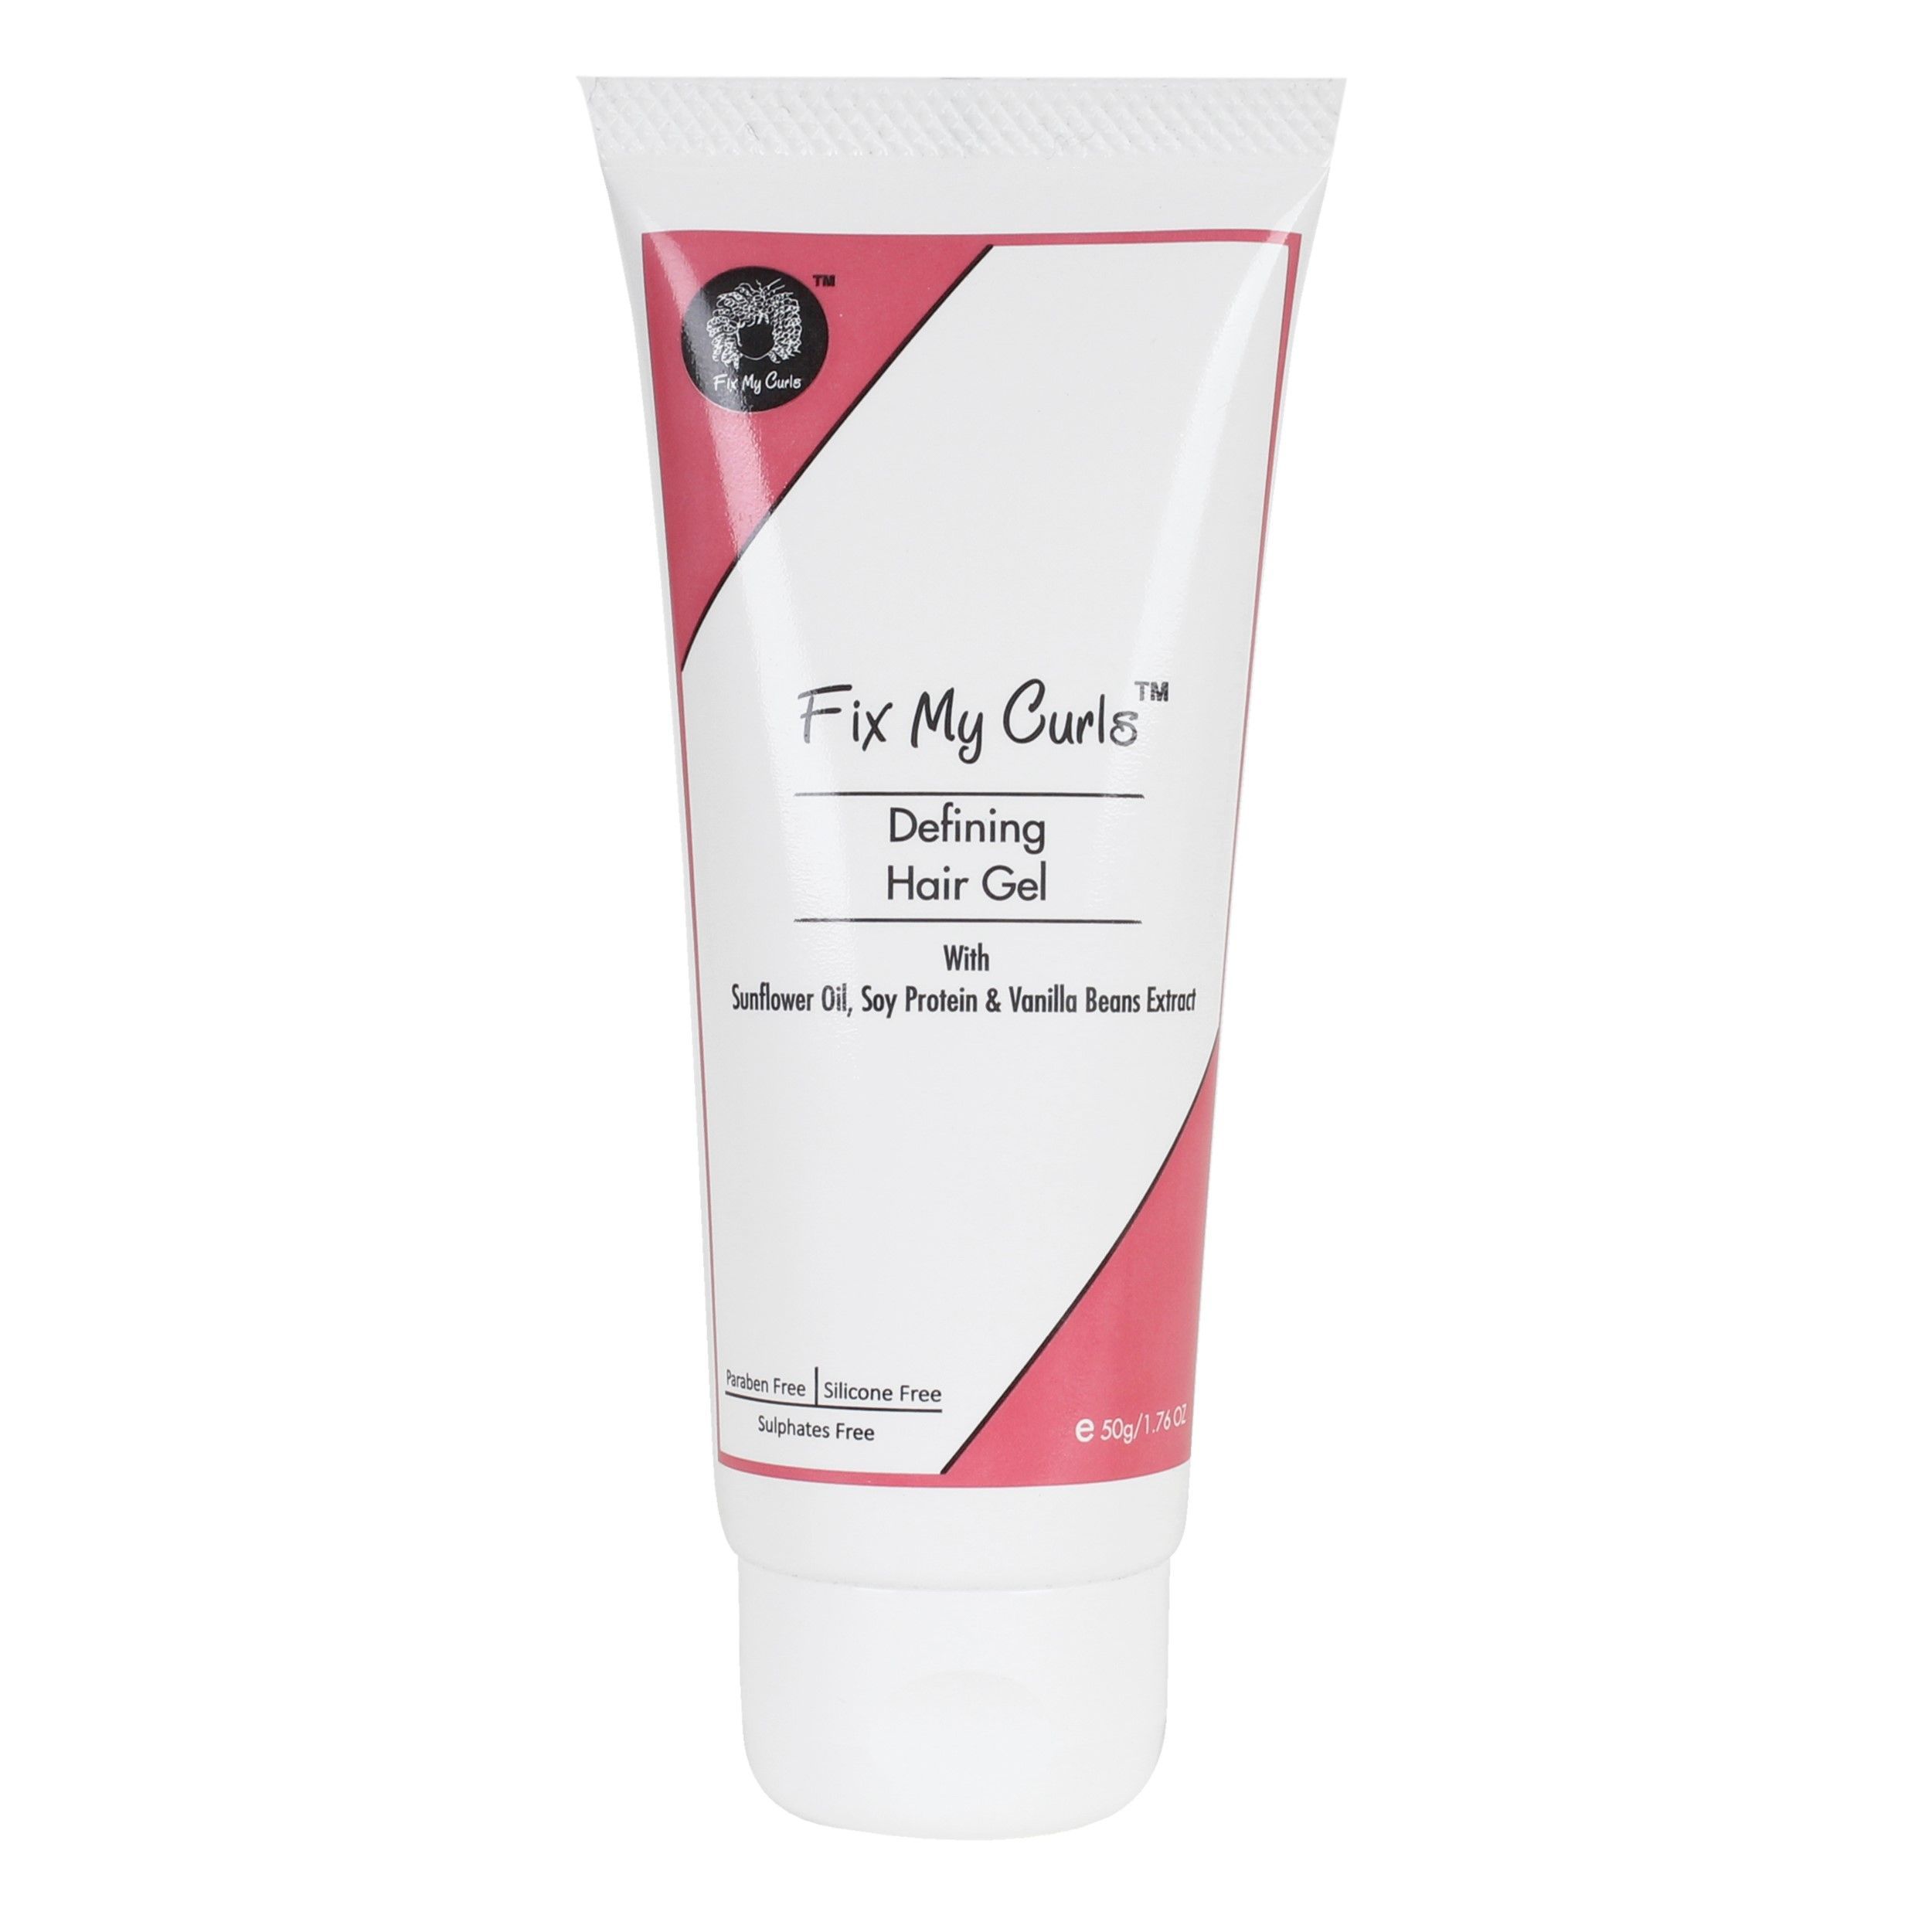 Fix My Curls Defining Hair Gel For Curly And Wavy Hair: Buy Fix My Curls  Defining Hair Gel For Curly And Wavy Hair Online at Best Price in India |  Nykaa